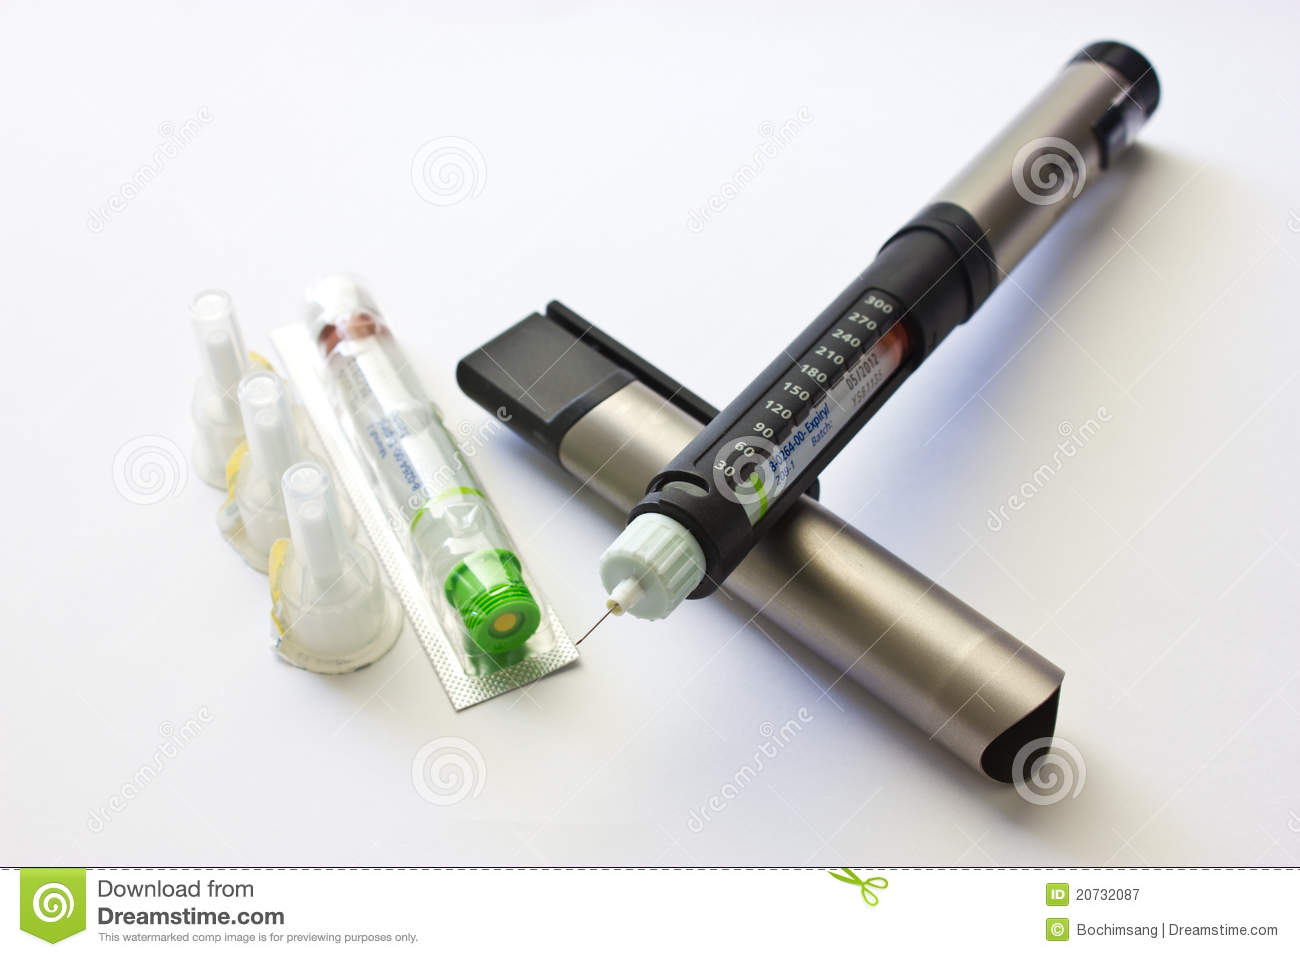 Insulin Penfill With Needle And A Vial Of Insulin 